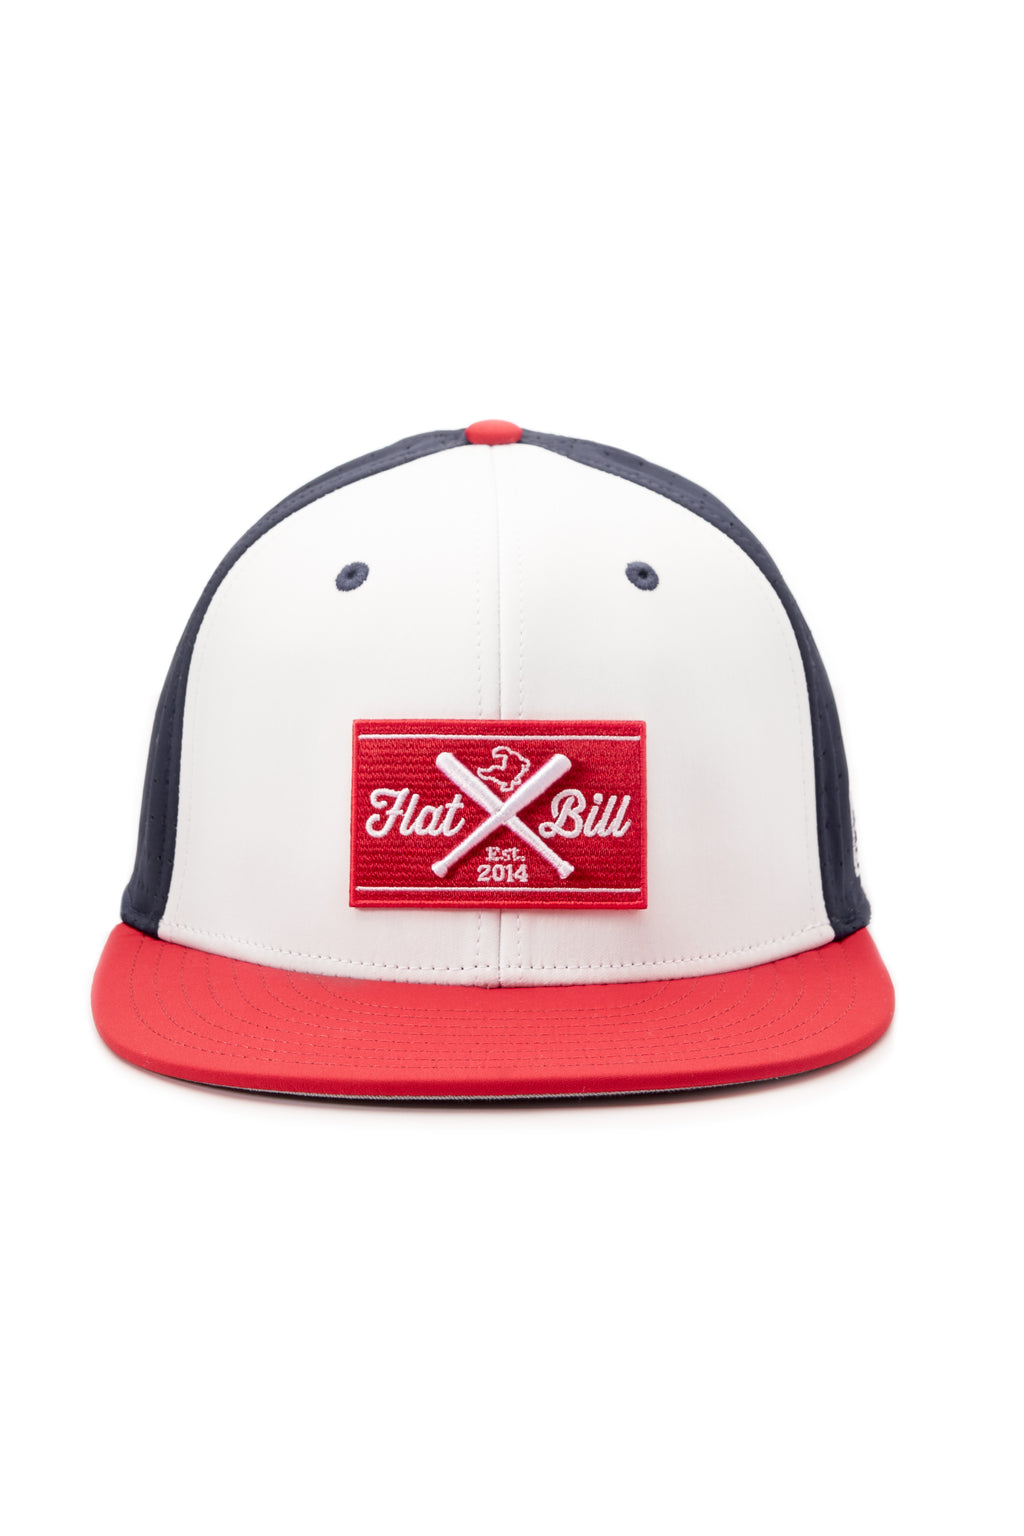 Flatbill Navy, Red, and White Flex Fit Cap